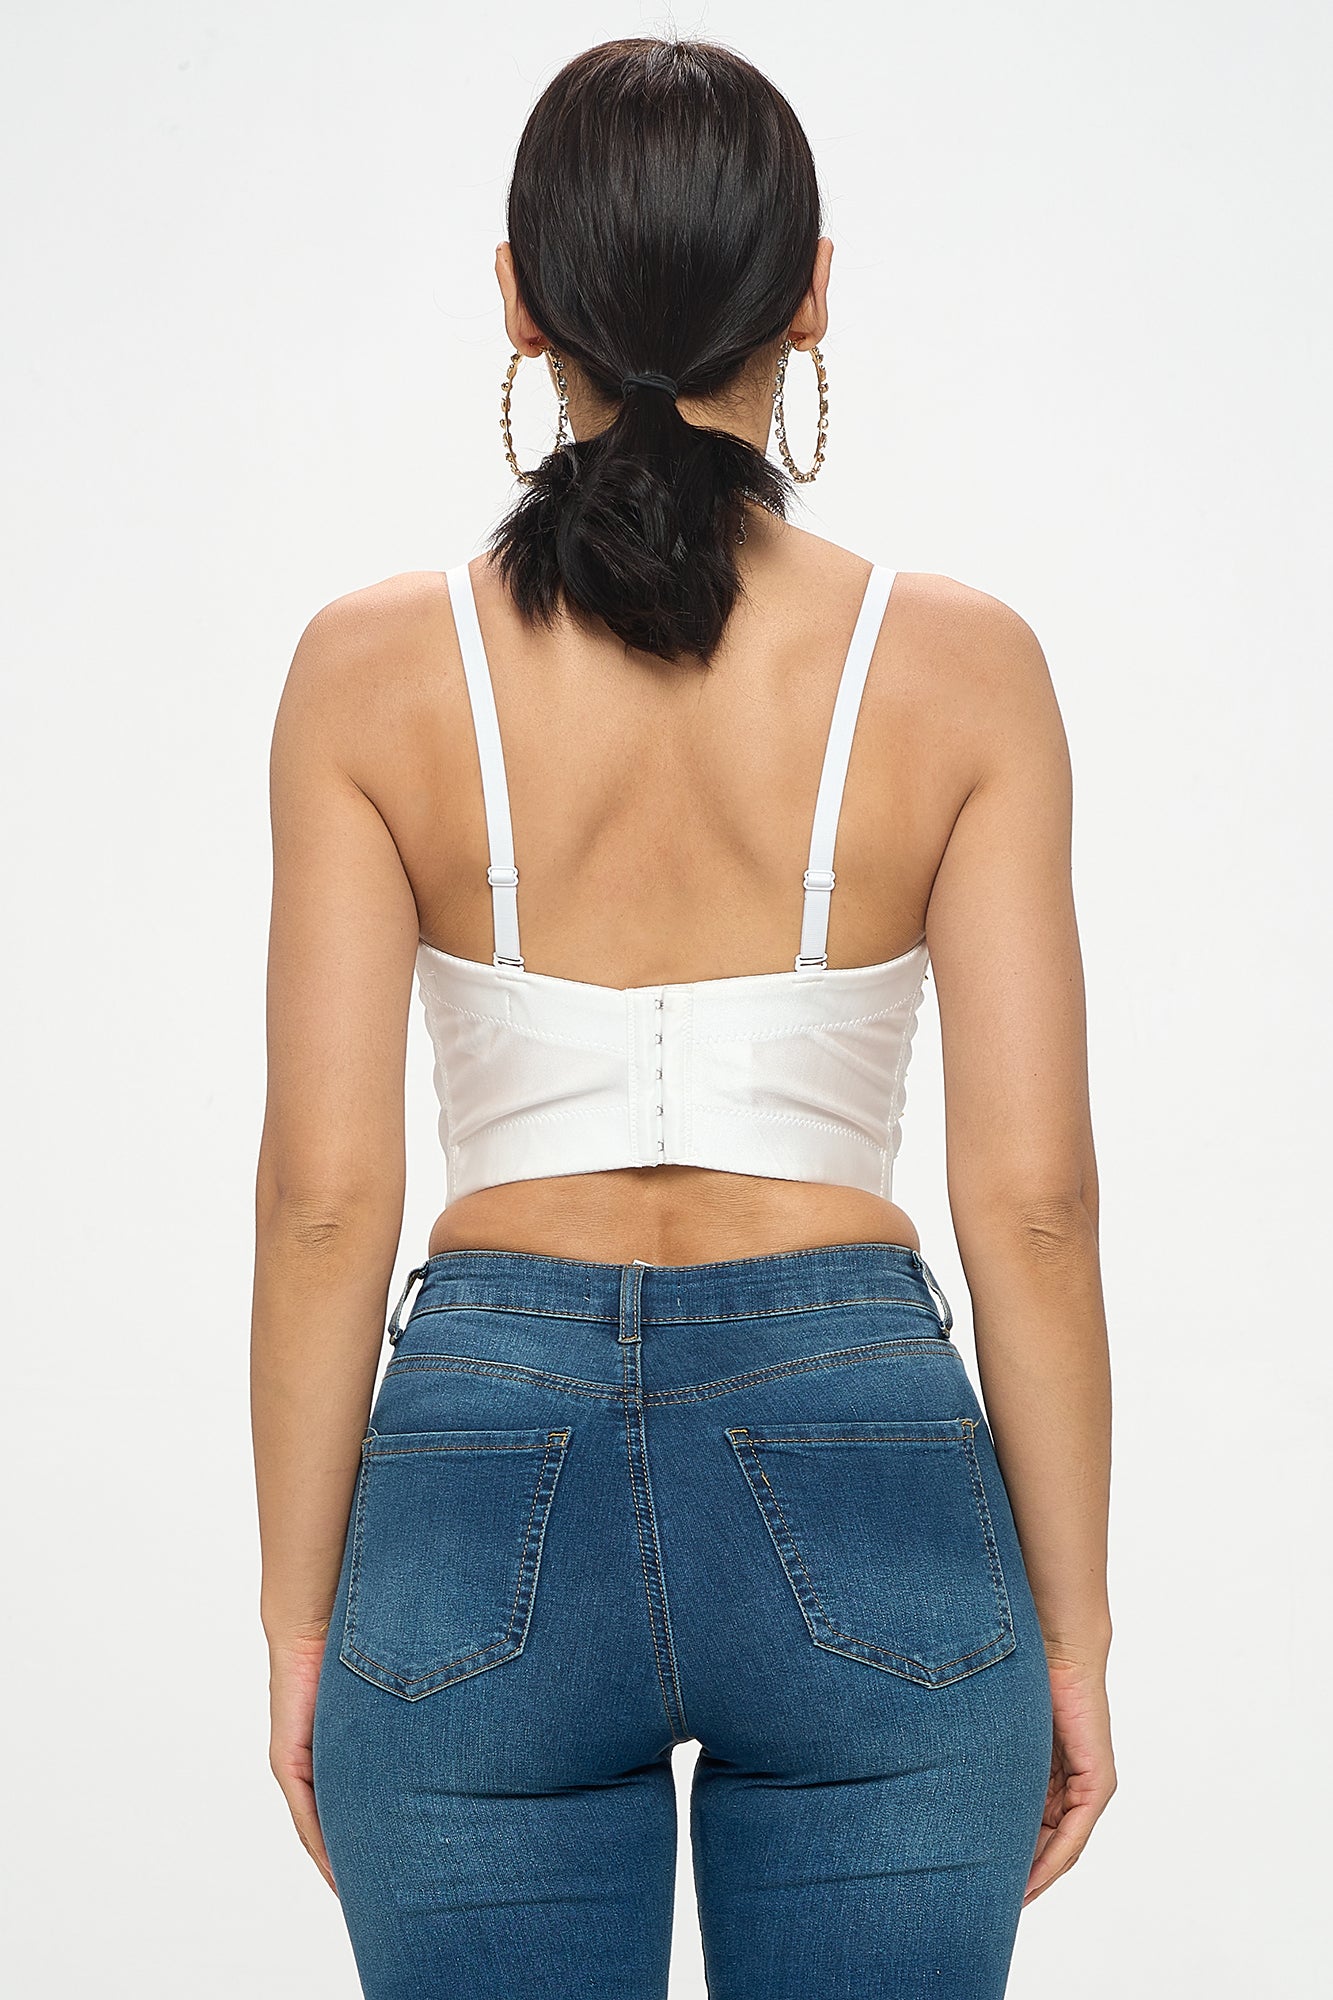 SPIKE STUDS BUSTIER CROP TOP – OhYes Fashion